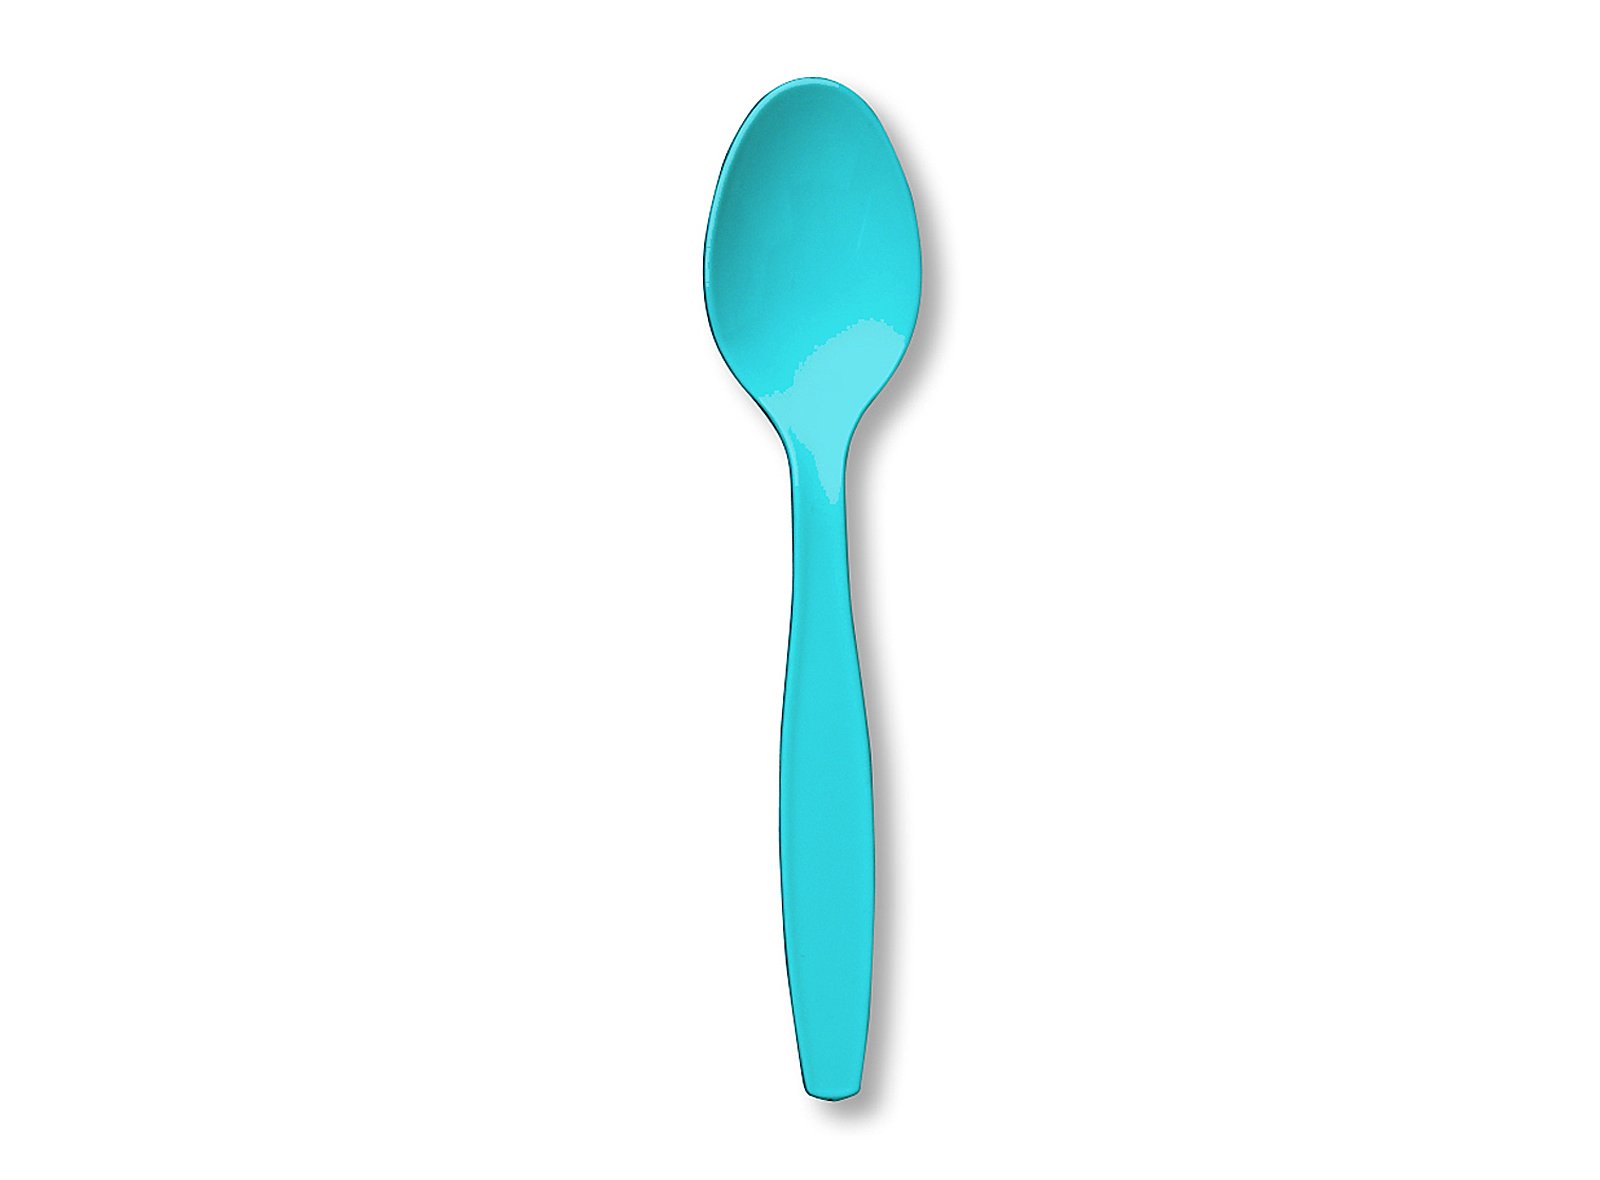 Bermuda Blue (Turquoise) Heavy Weight Spoons (24 count)